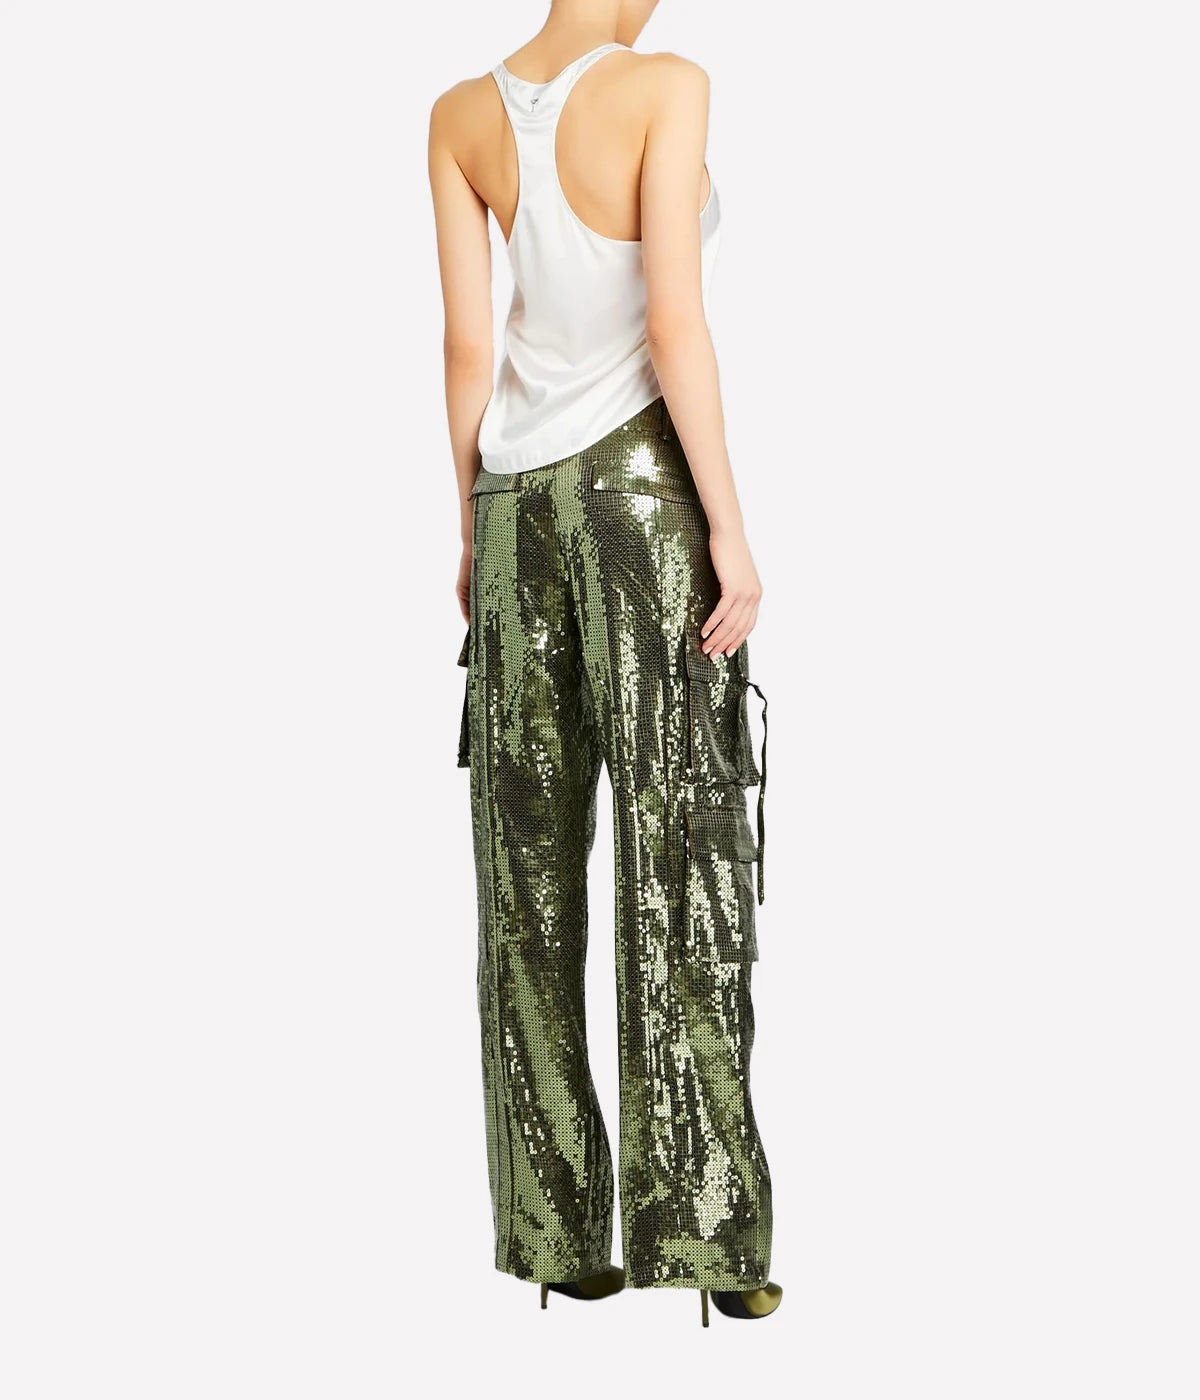 Andre Pant in Military Green Sequin